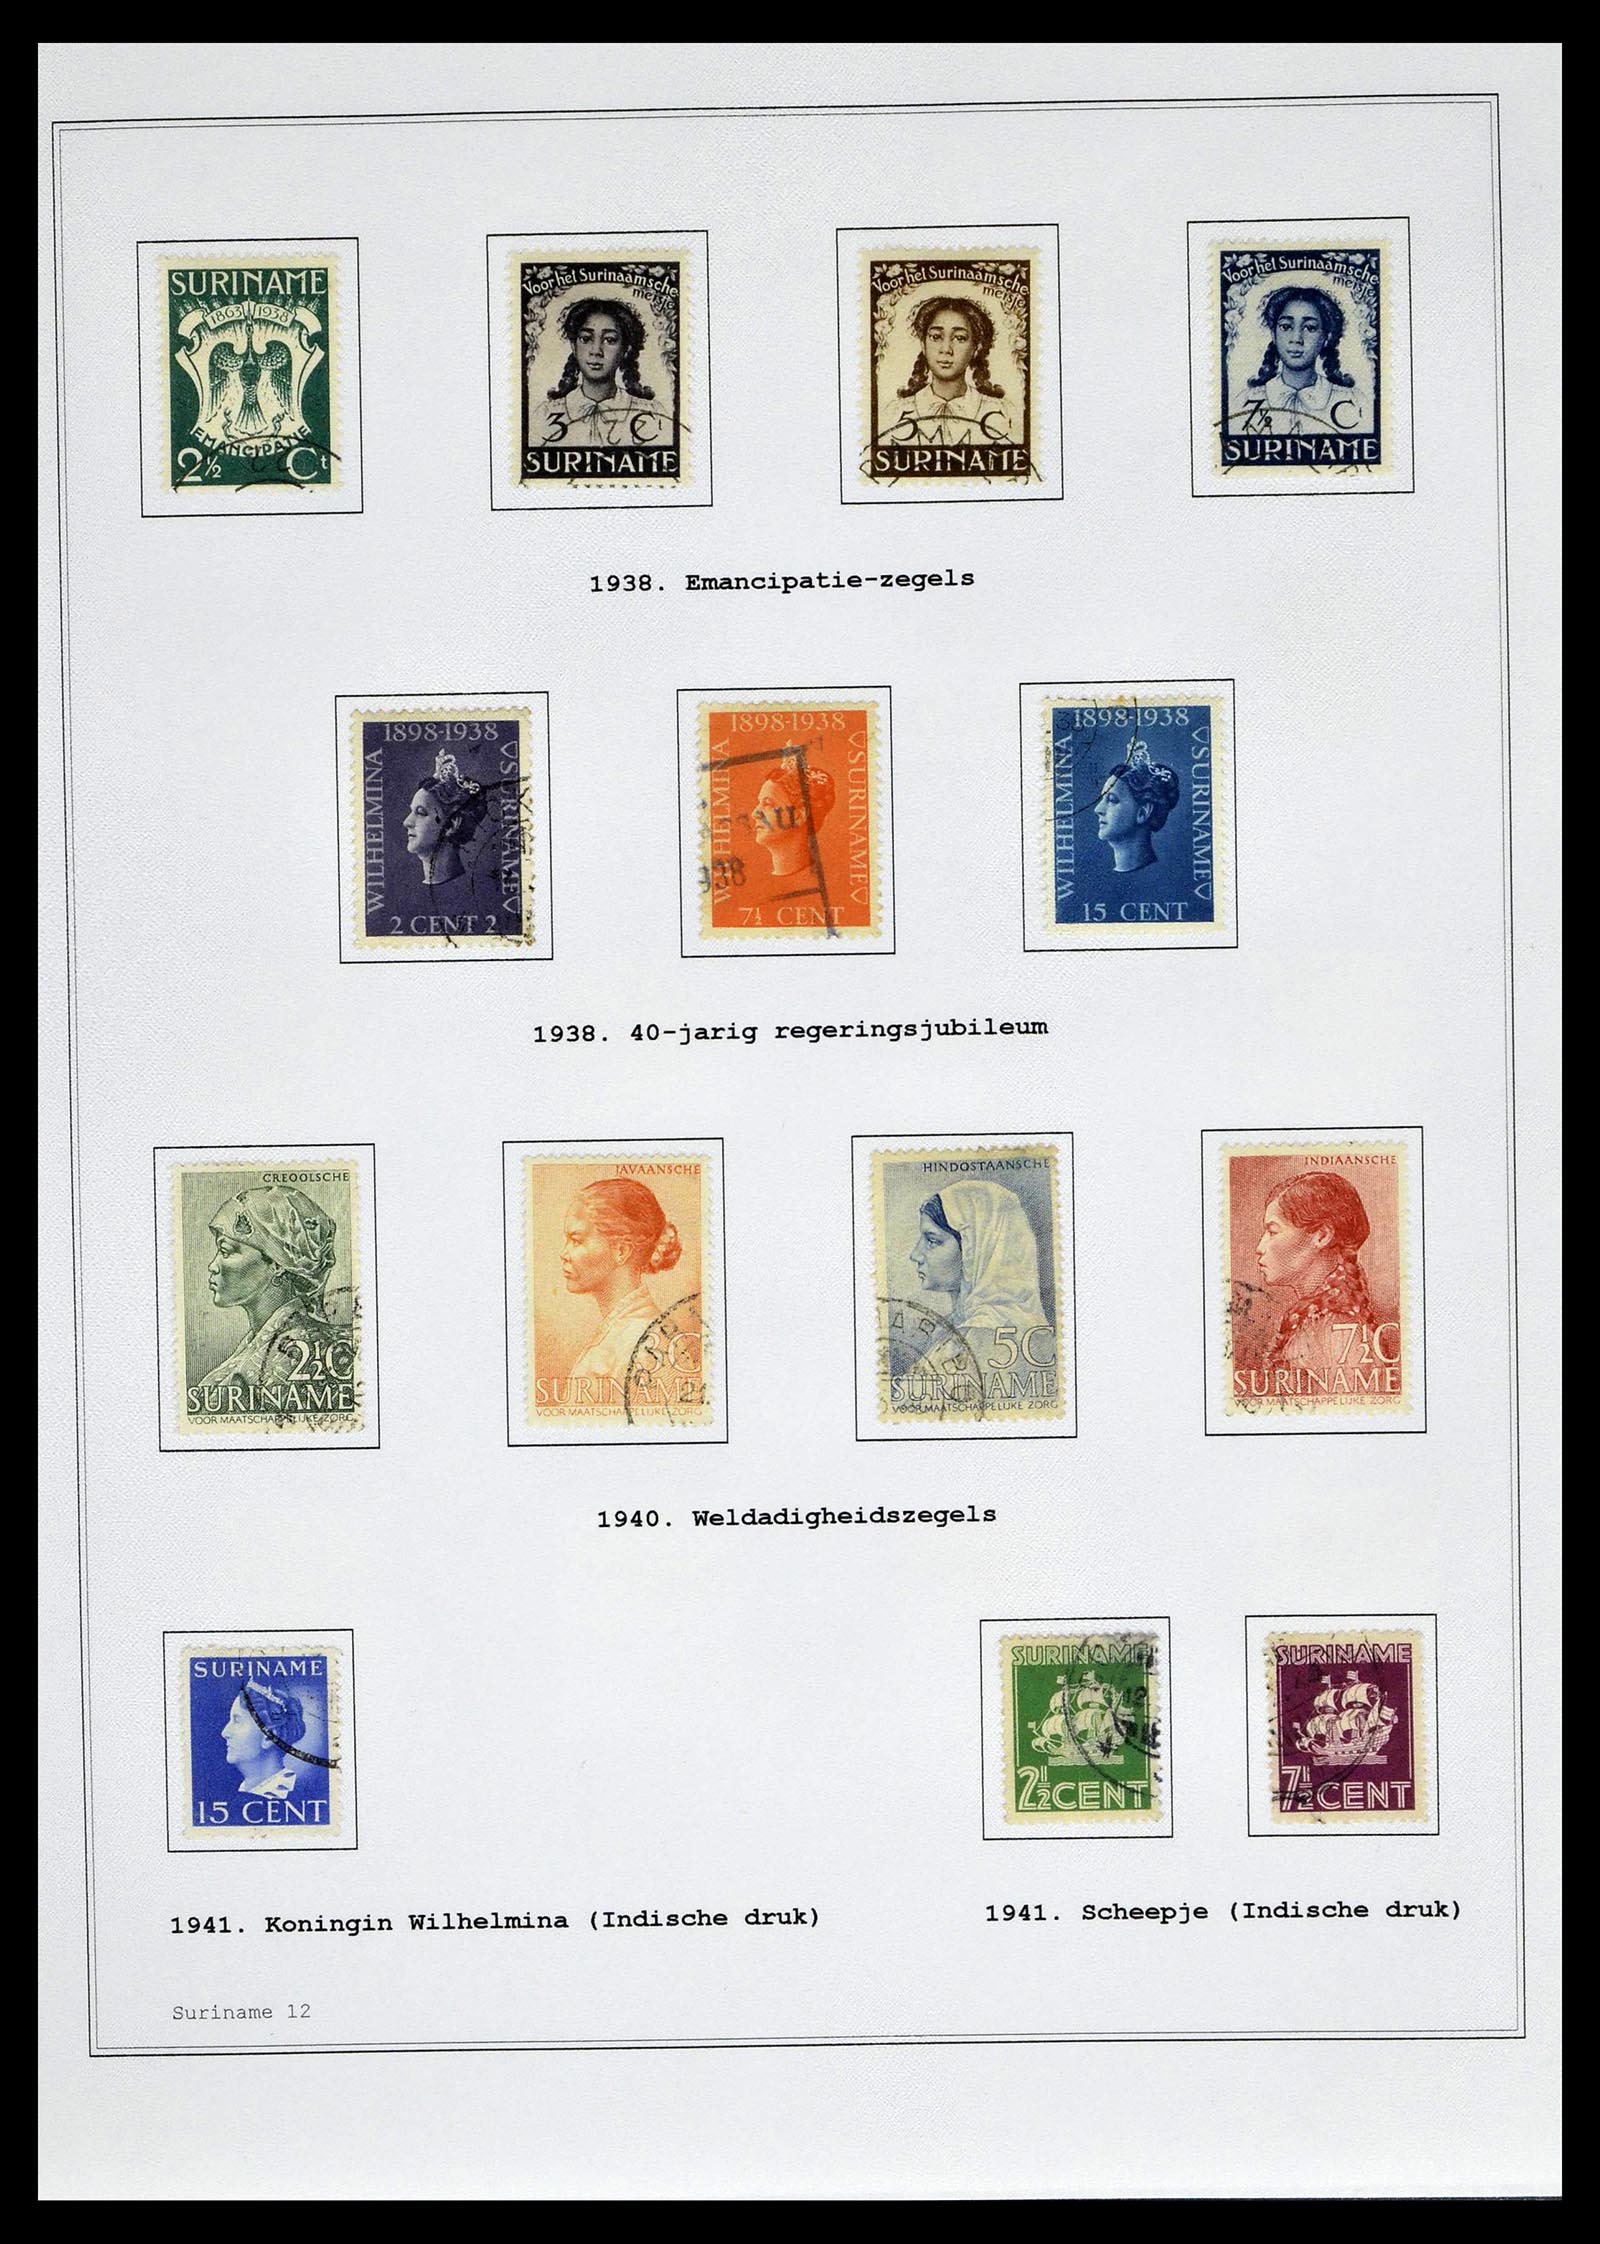 39026 0123 - Stamp collection 39026 Dutch east Indies and Suriname 1864-1975.